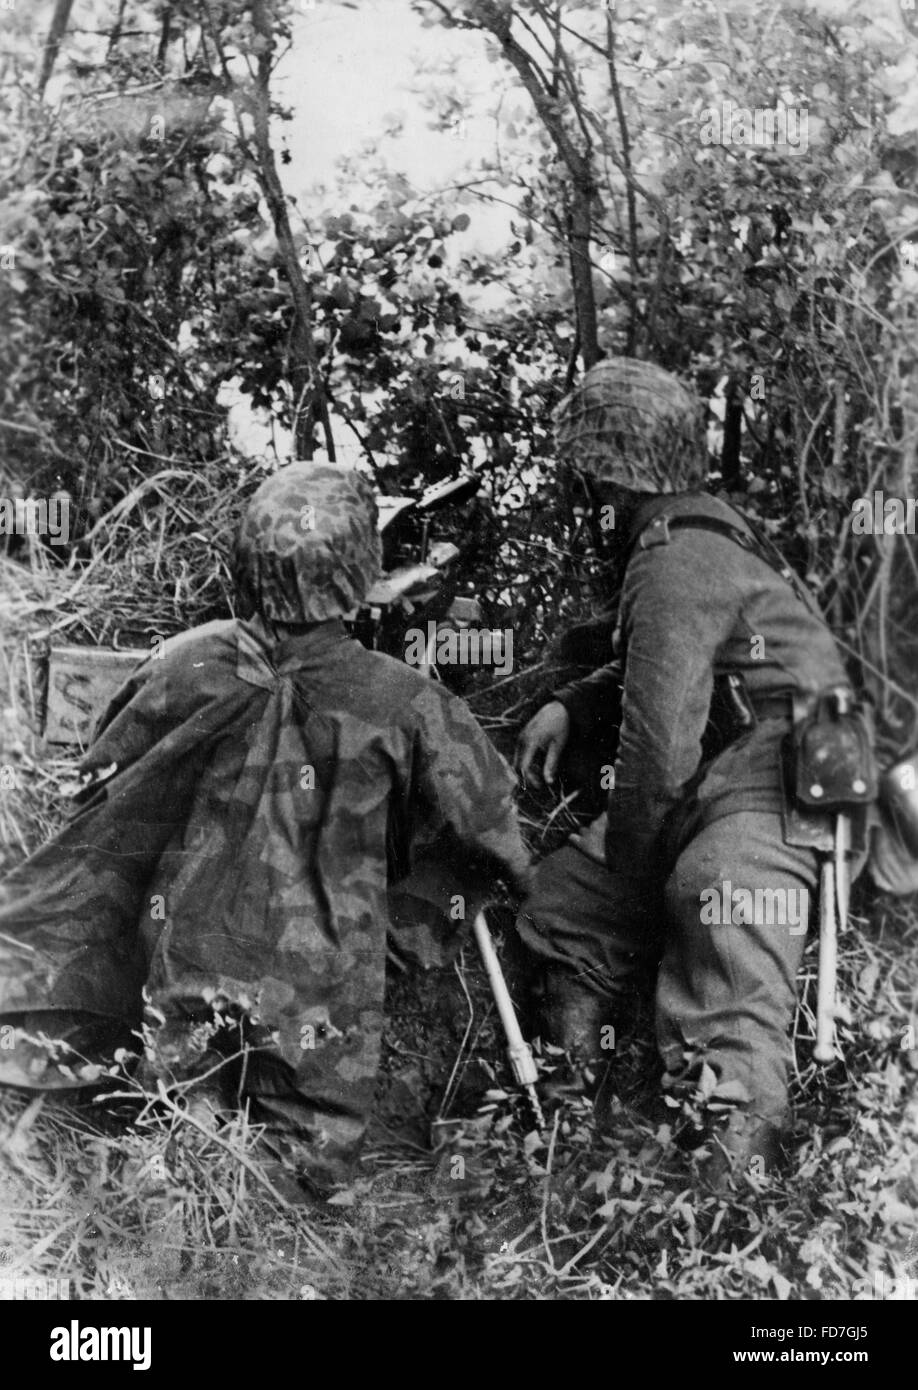 Machine gun position of the Waffen SS in Normandy, 1944 Stock Photo